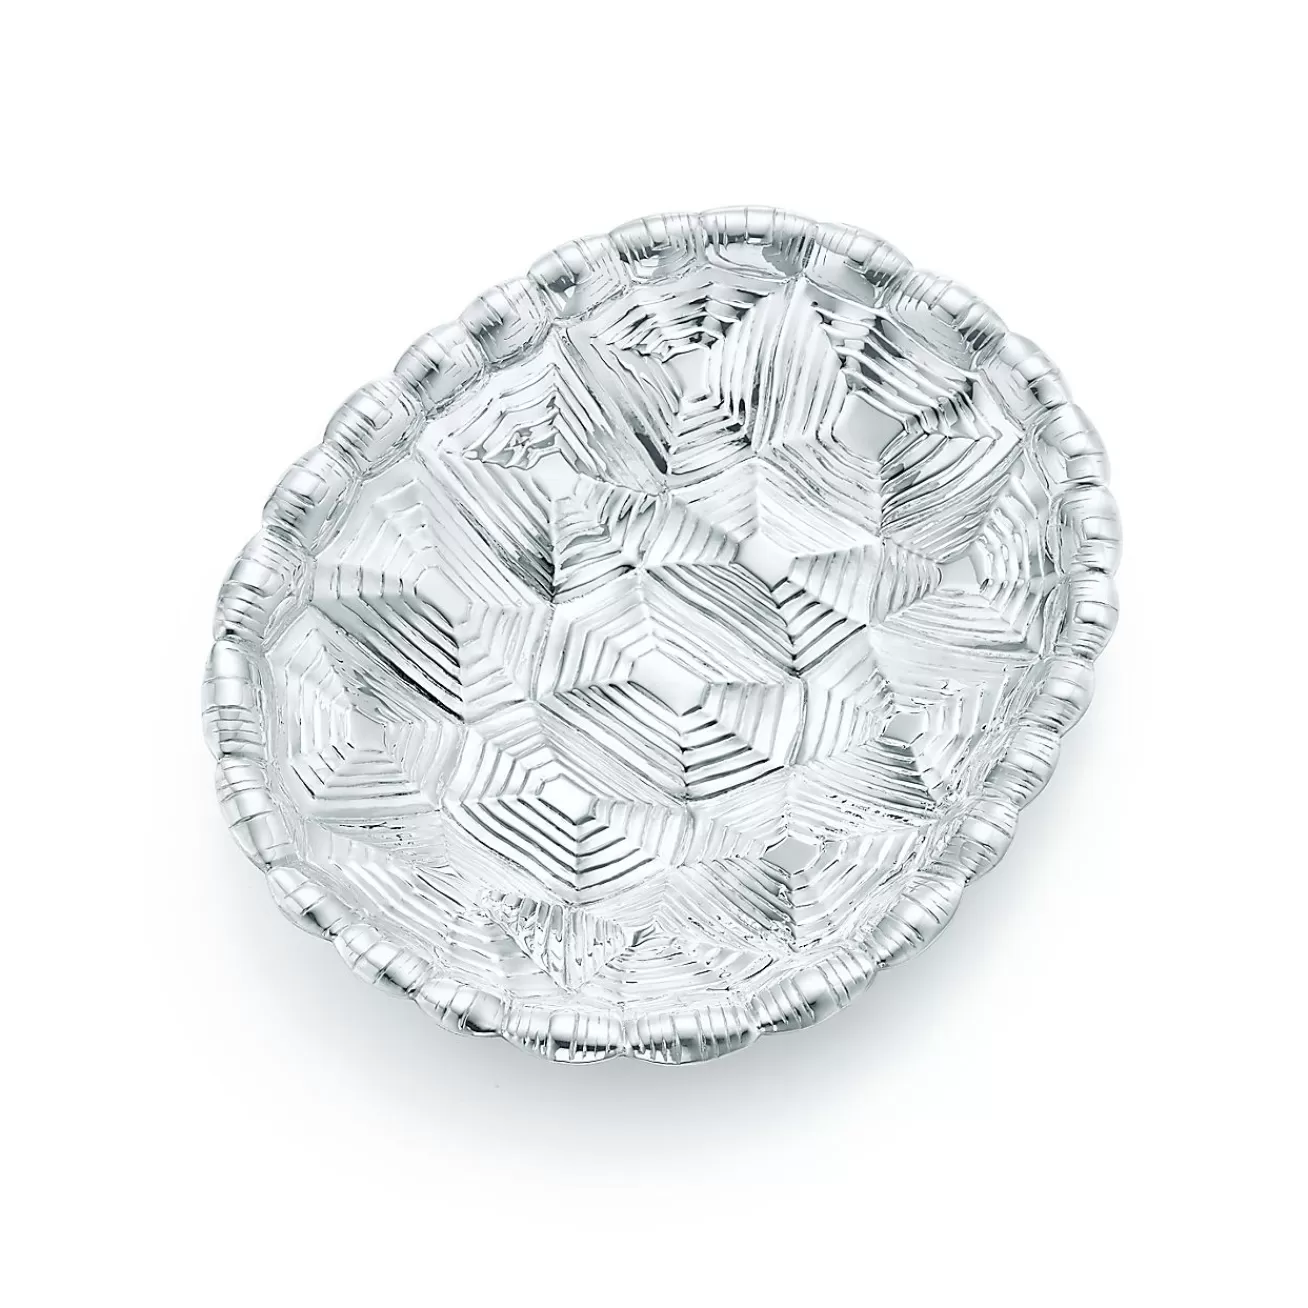 Tiffany & Co. Tortoise shell dish in sterling silver. | ^ The Home | Housewarming Gifts